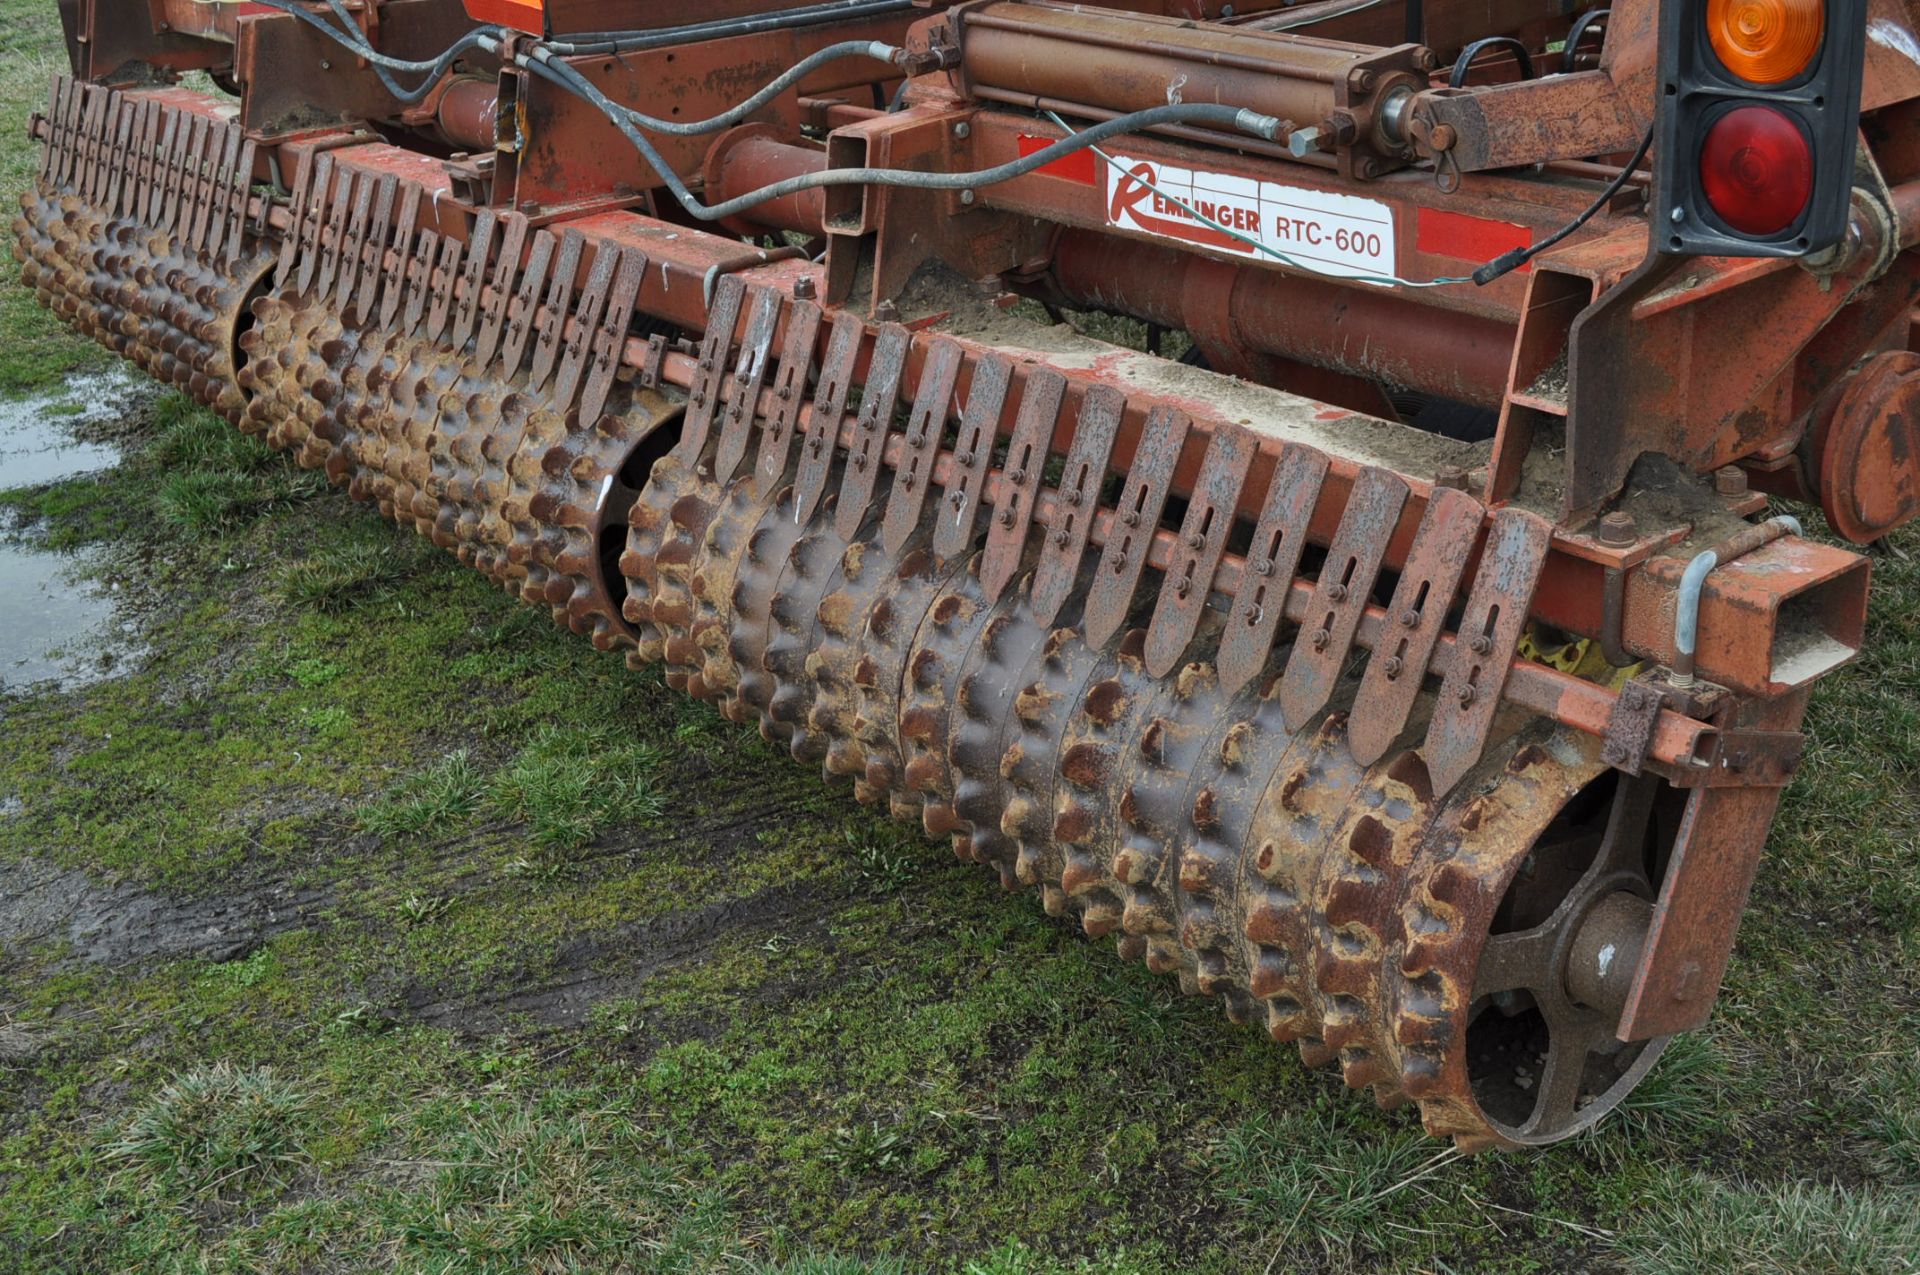 30’ Remlinger RT600 field cultivator, flat fold, S tine shanks, notched packer wheel - Image 11 of 11